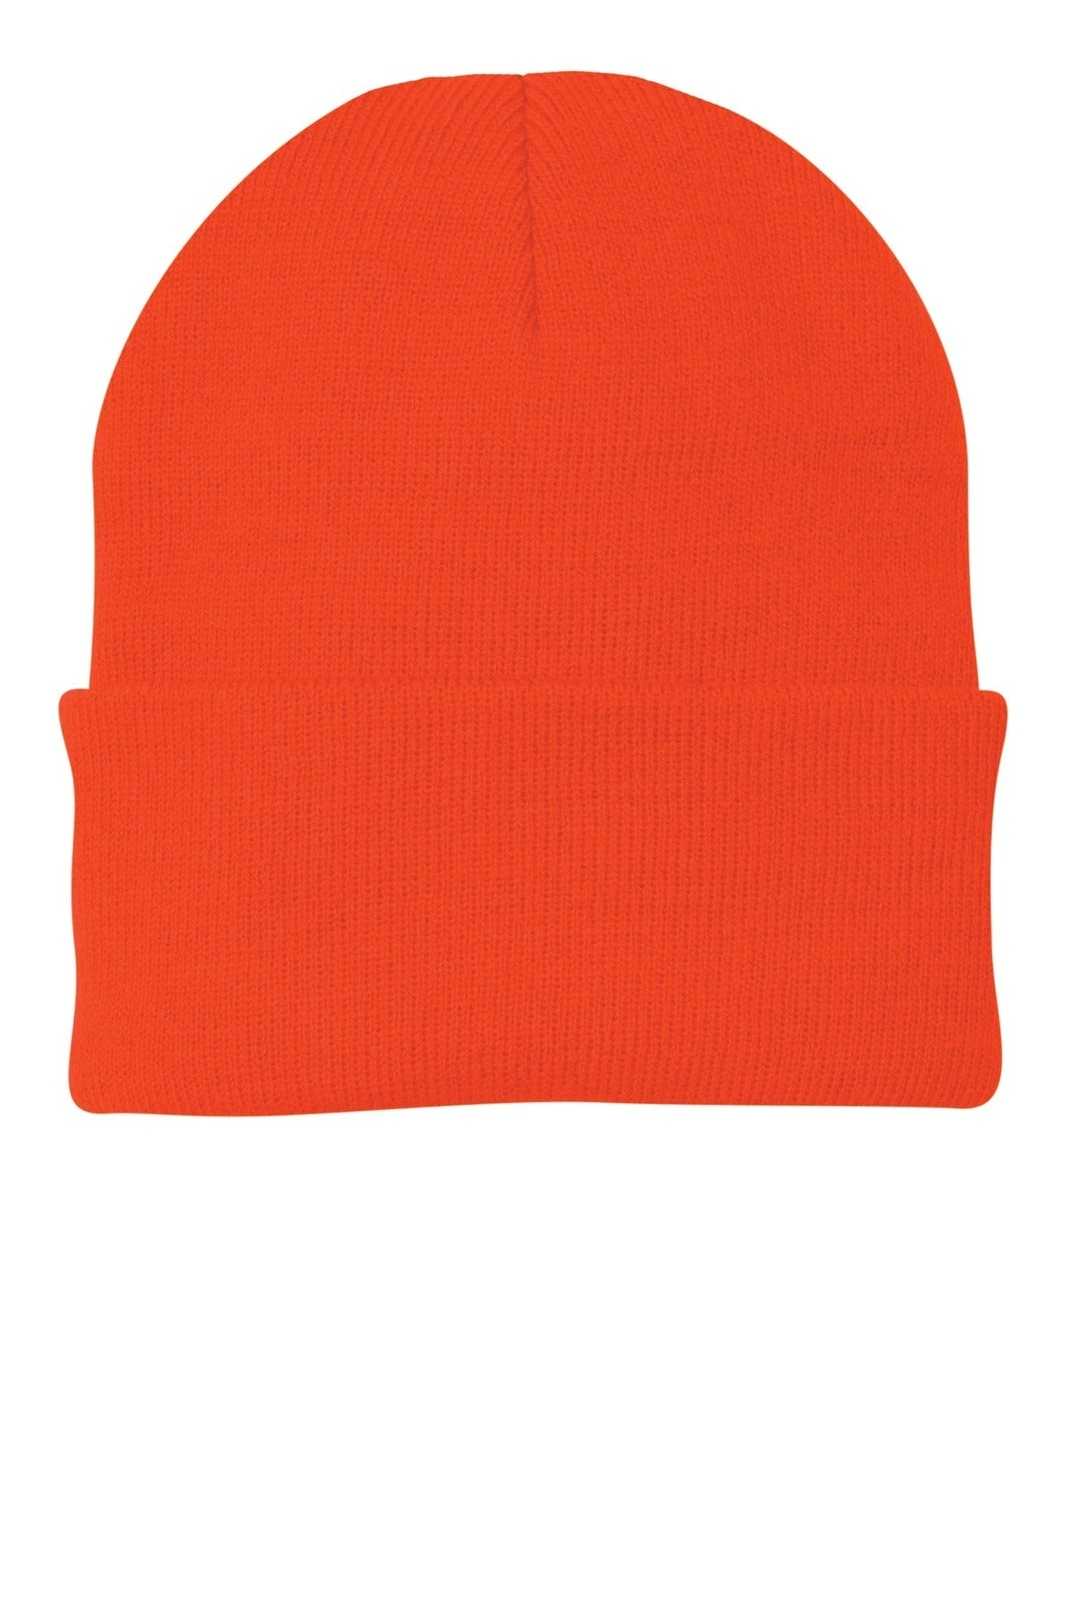 Port & Company CP90 Knit Cap with Cuff - Athletic Orange - HIT a Double - 1